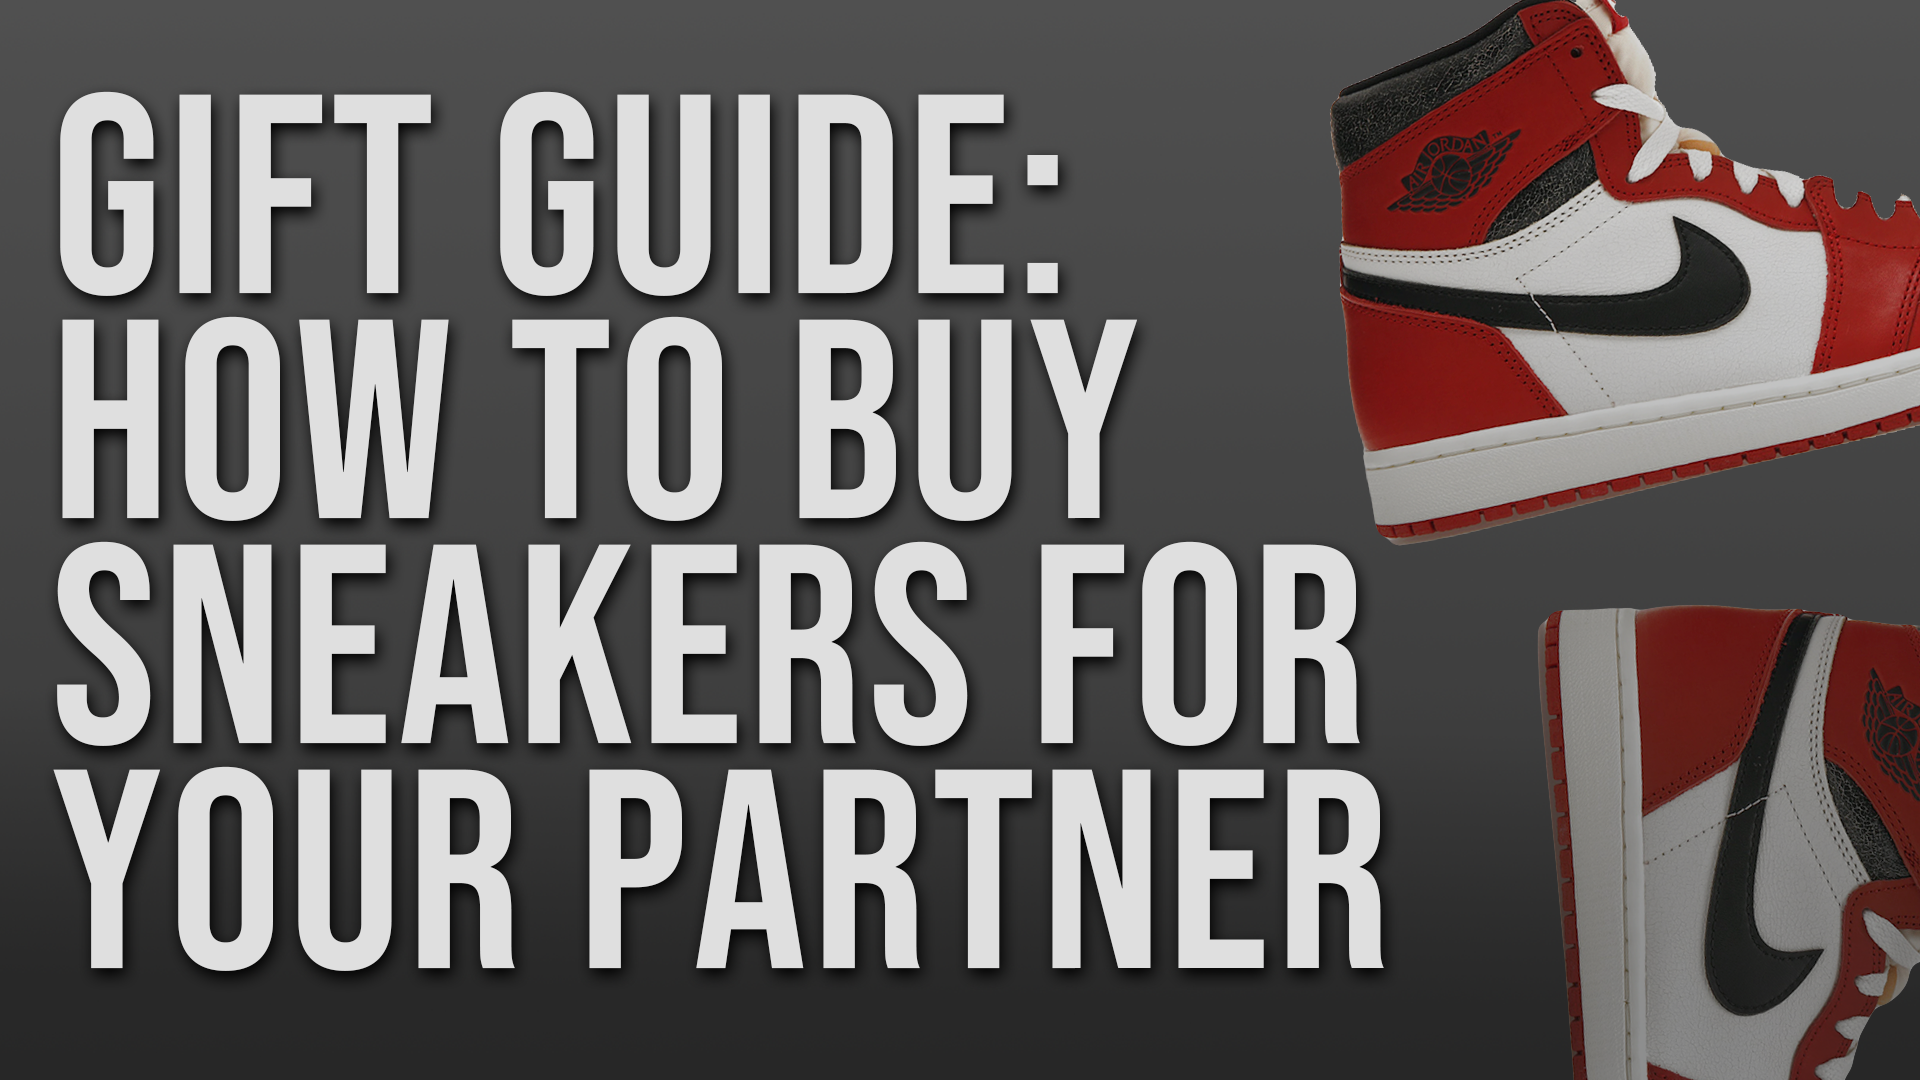 Gift Guide: How to Buy Sneakers for your Partner